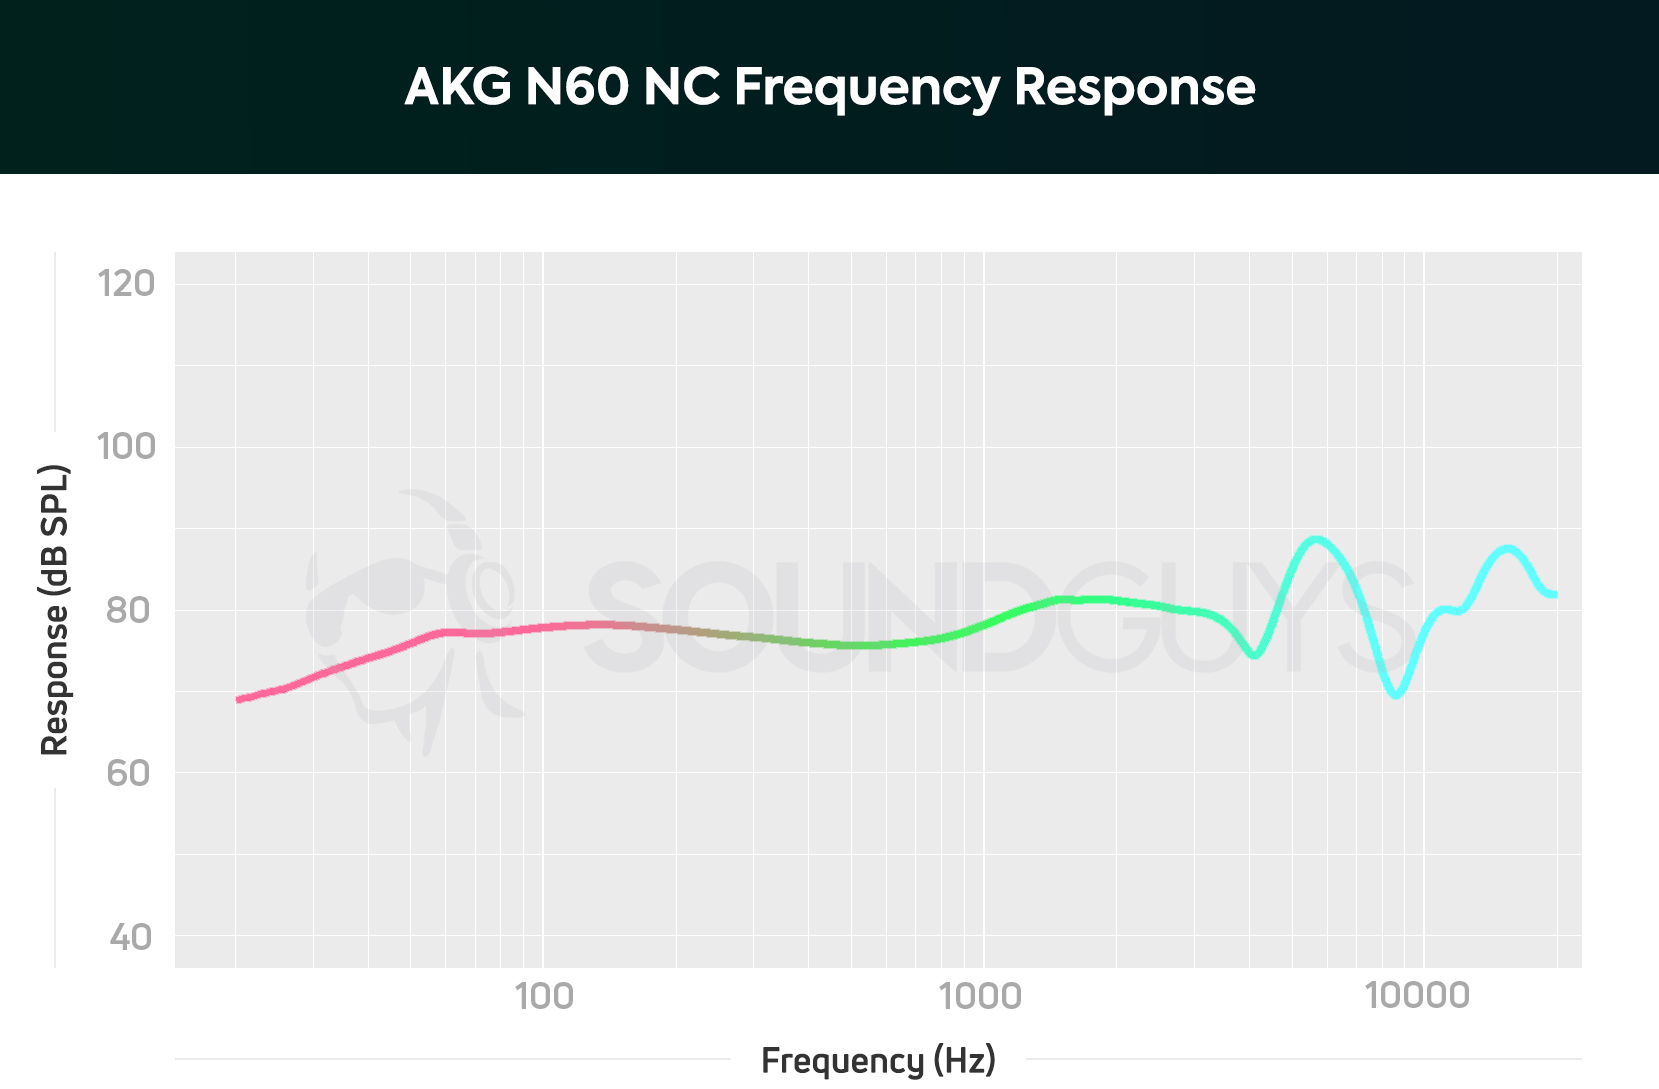 A chart showing the frequency response of the AKG N60 NC.